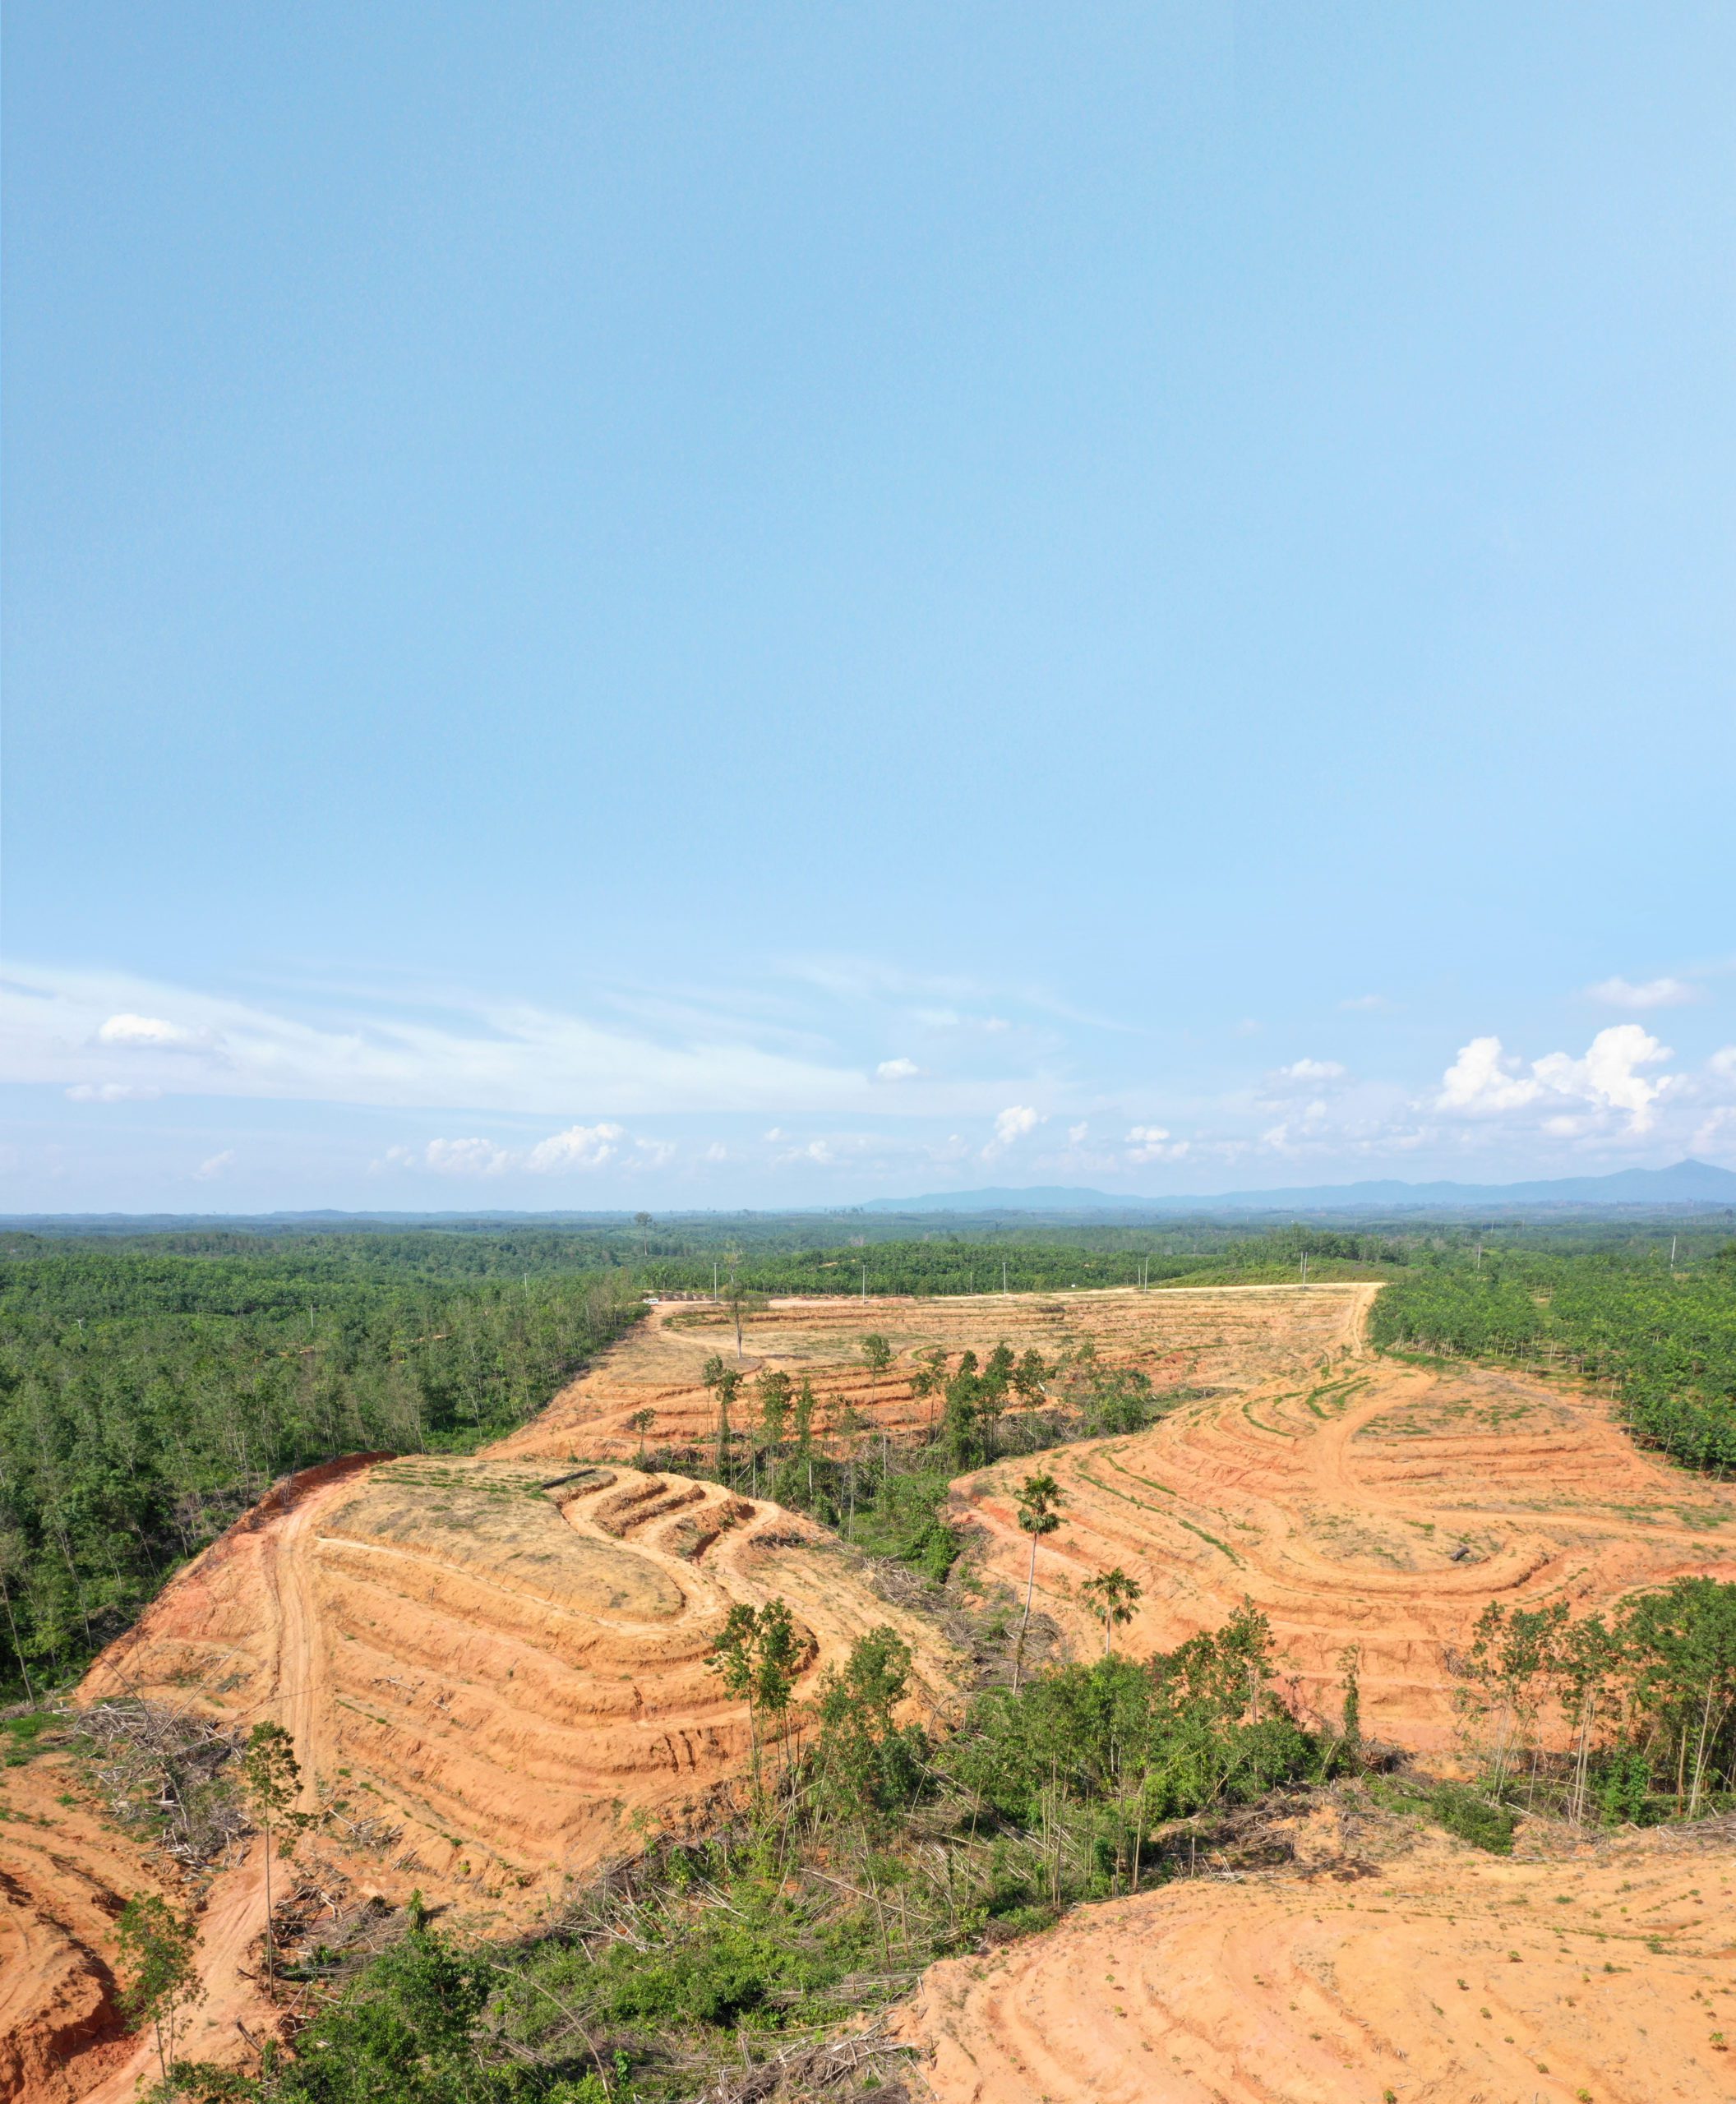 industrial deforestation at Michelin's RLU project in Jambi, Indonesia.